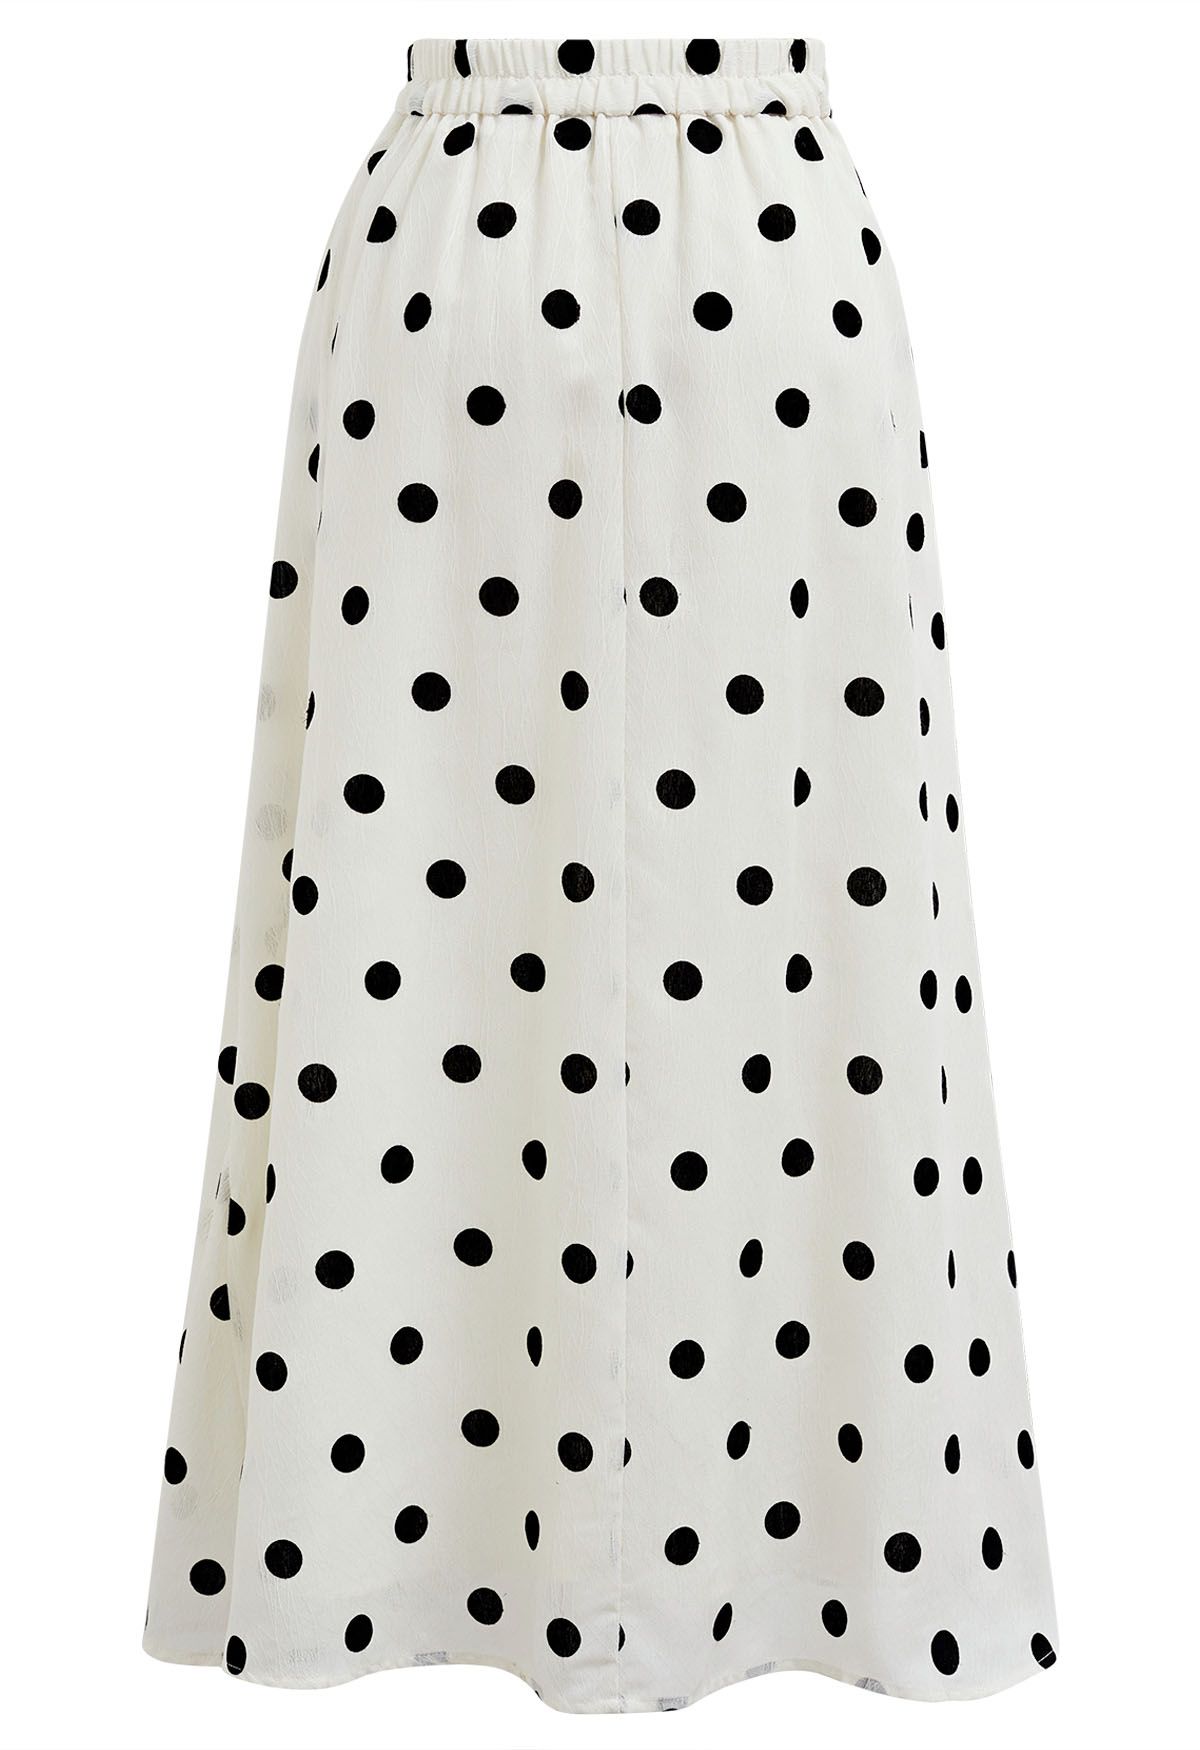 Texture Polka Dot Printed Pleated Maxi Skirt in Cream - Retro, Indie ...